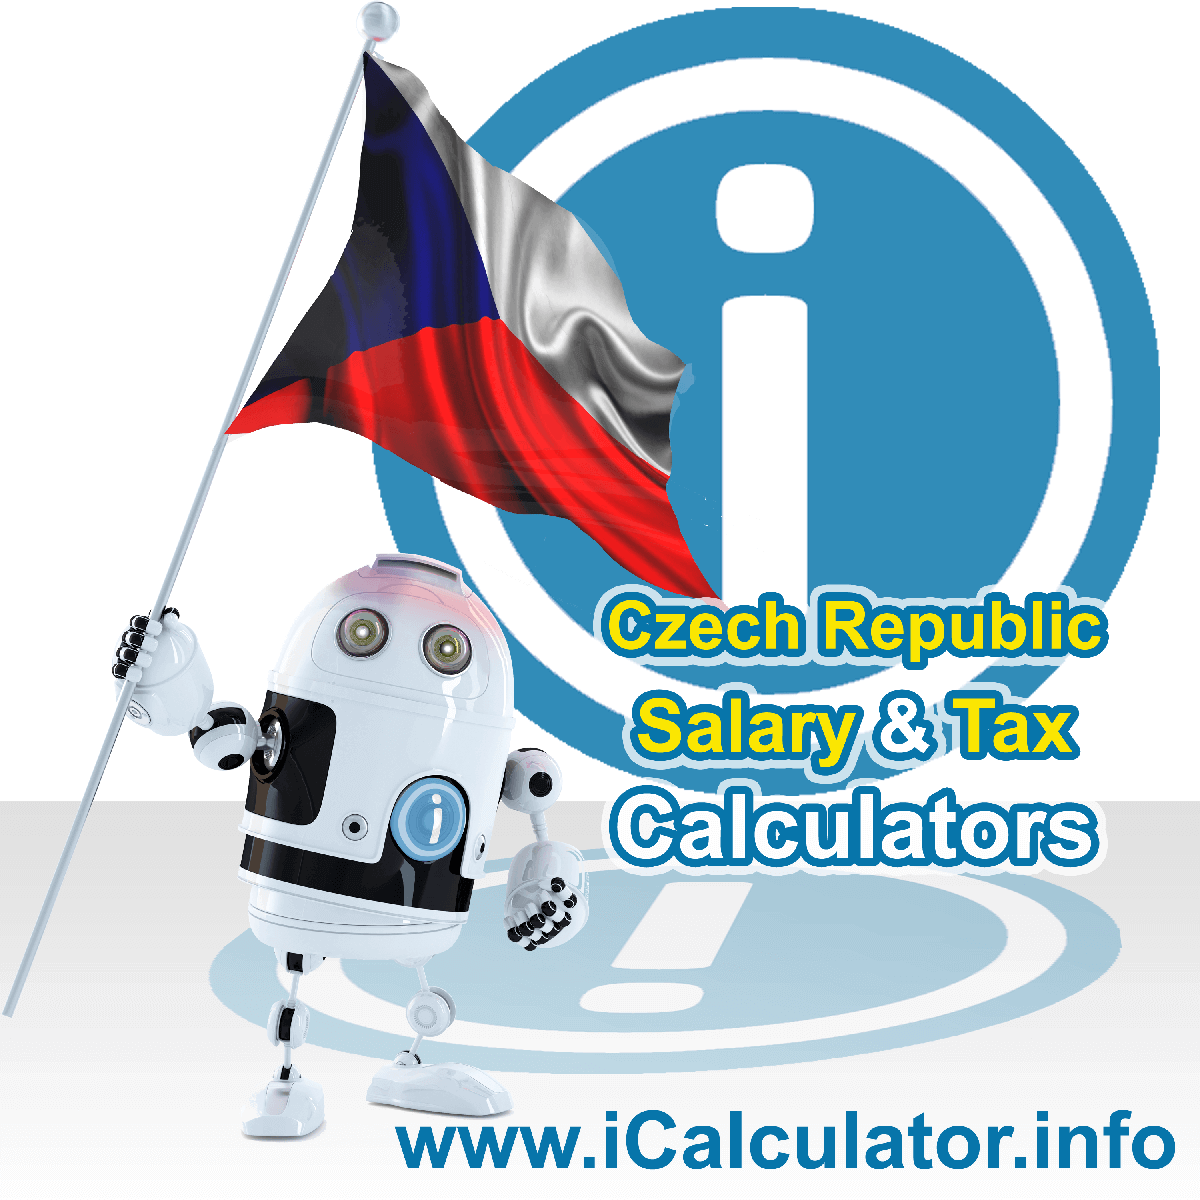 Czech Republic Wage Calculator. This image shows the Czech Republic flag and information relating to the tax formula for the Czech Republic Tax Calculator